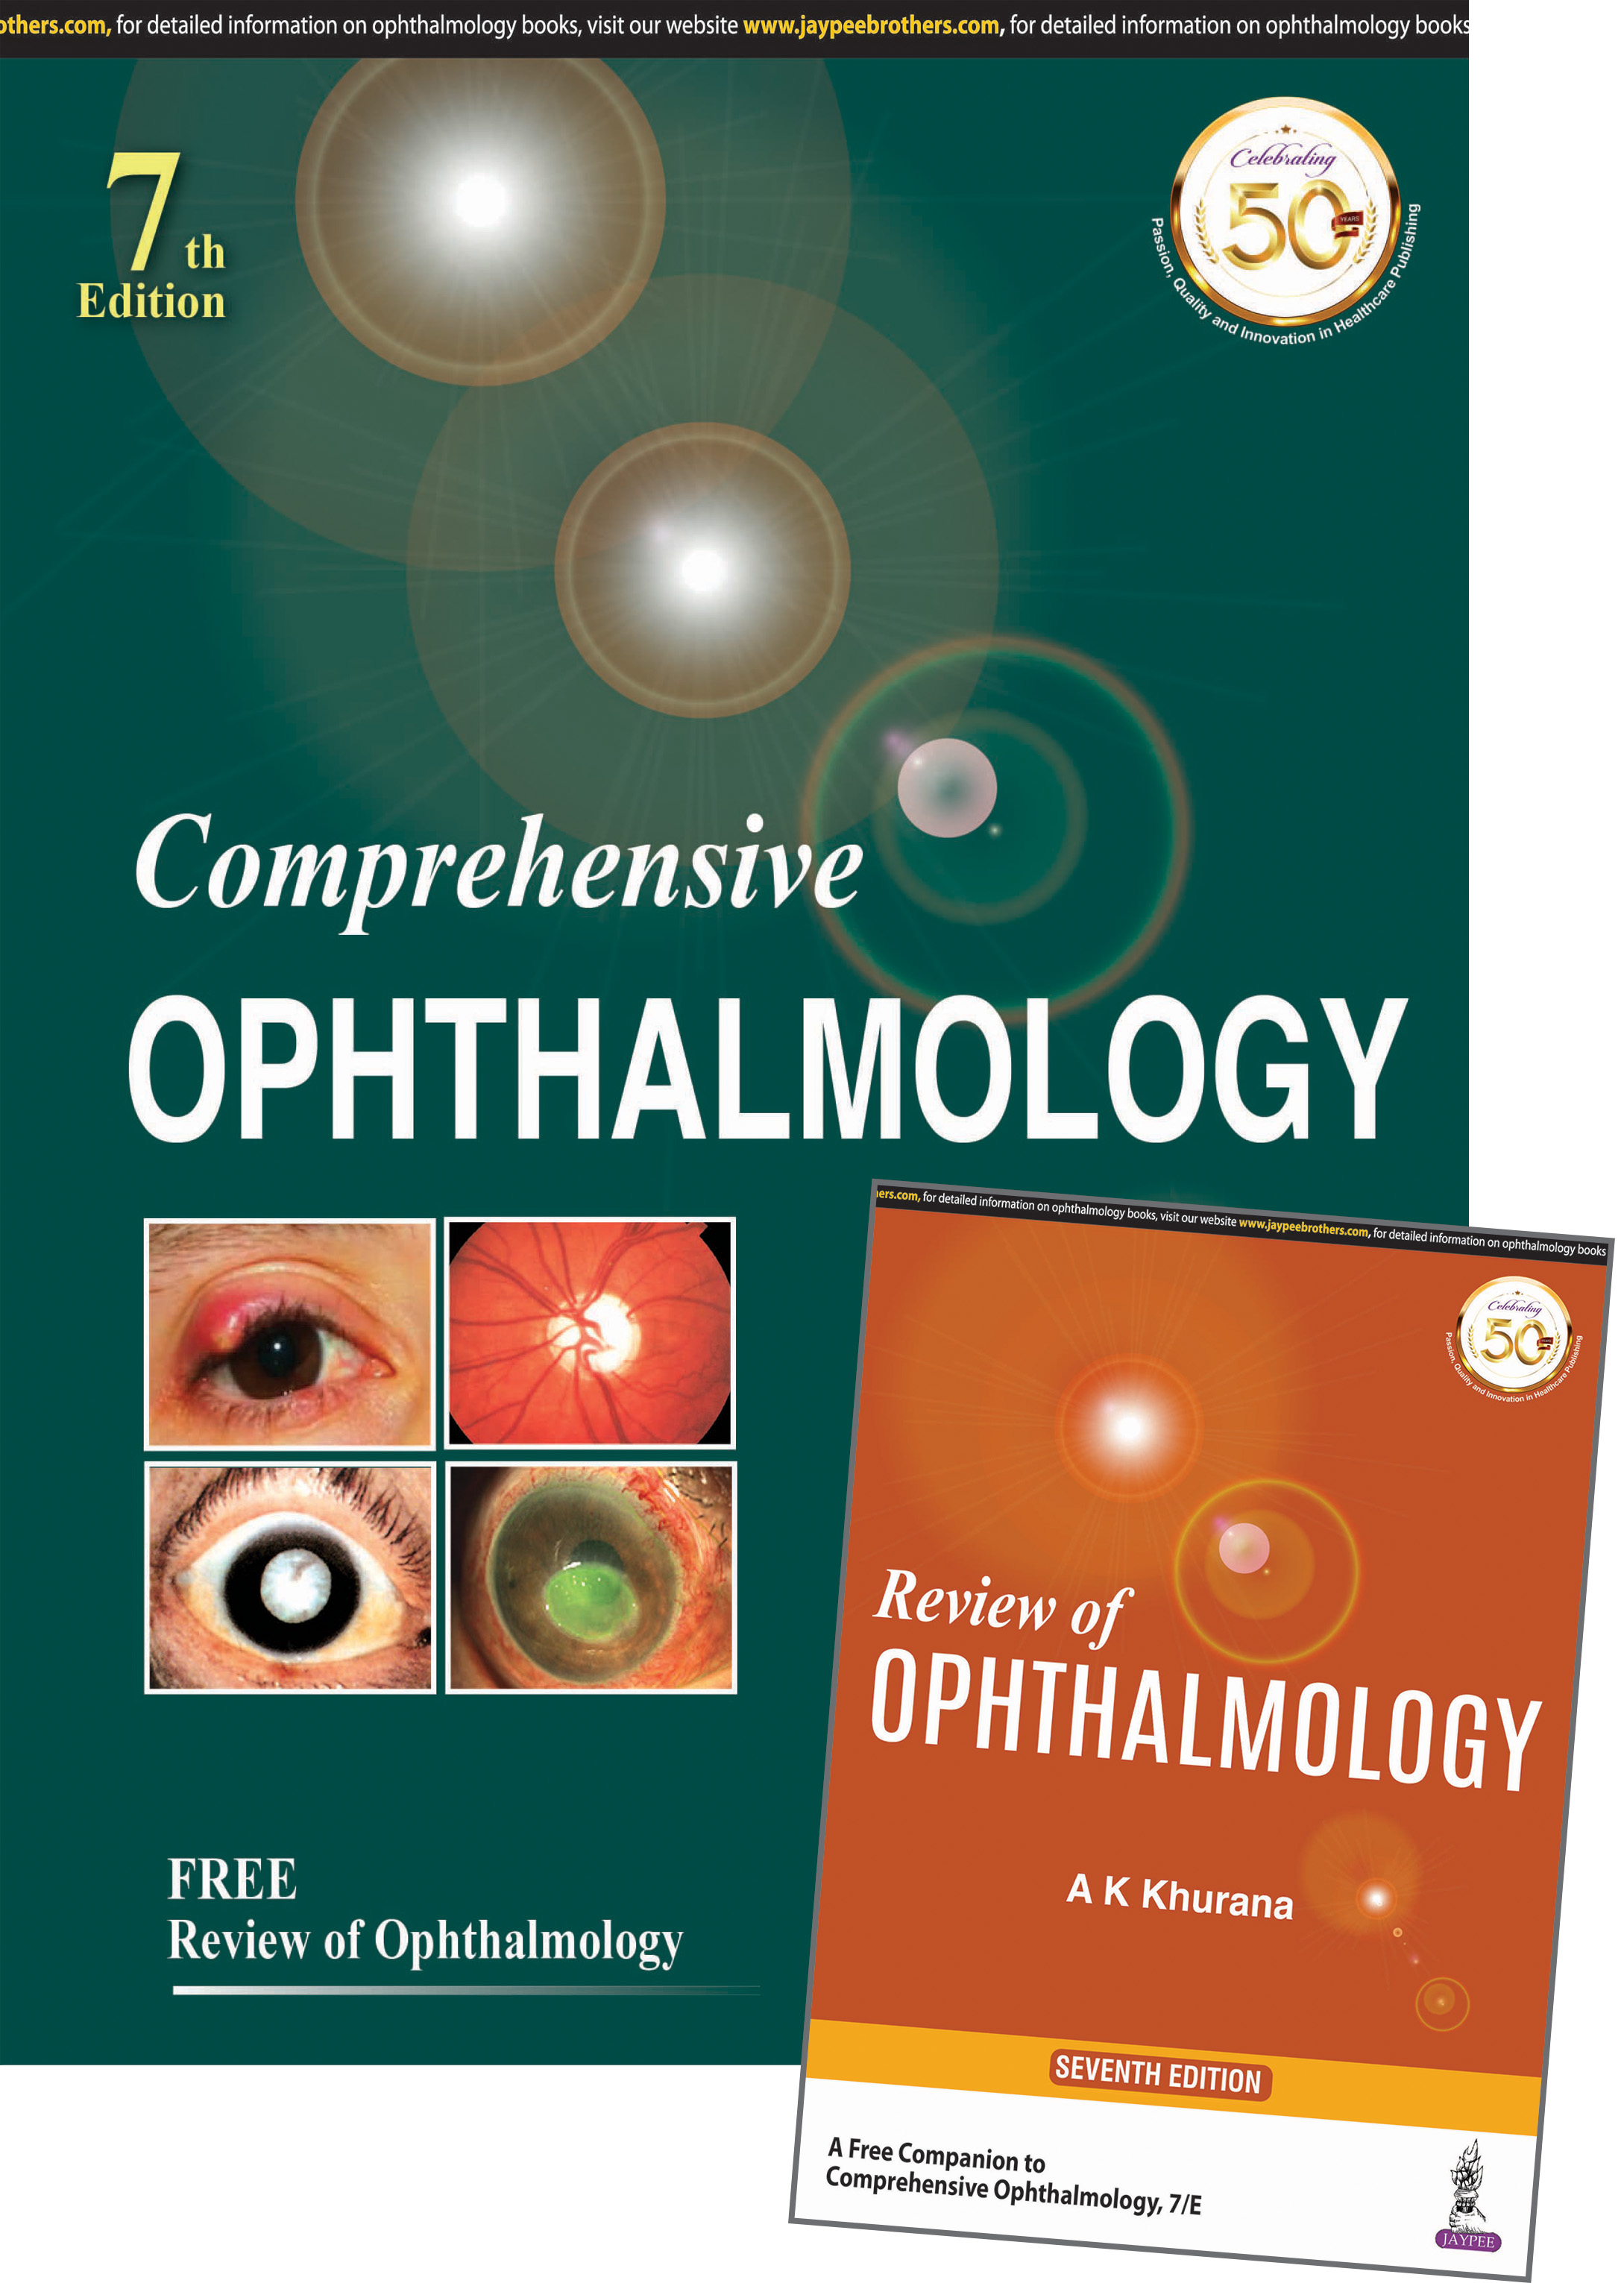 COMPREHENSIVE OPHTHALMOLOGY (WITH FREE REVIEW OF OPHTHALMOLOGY)